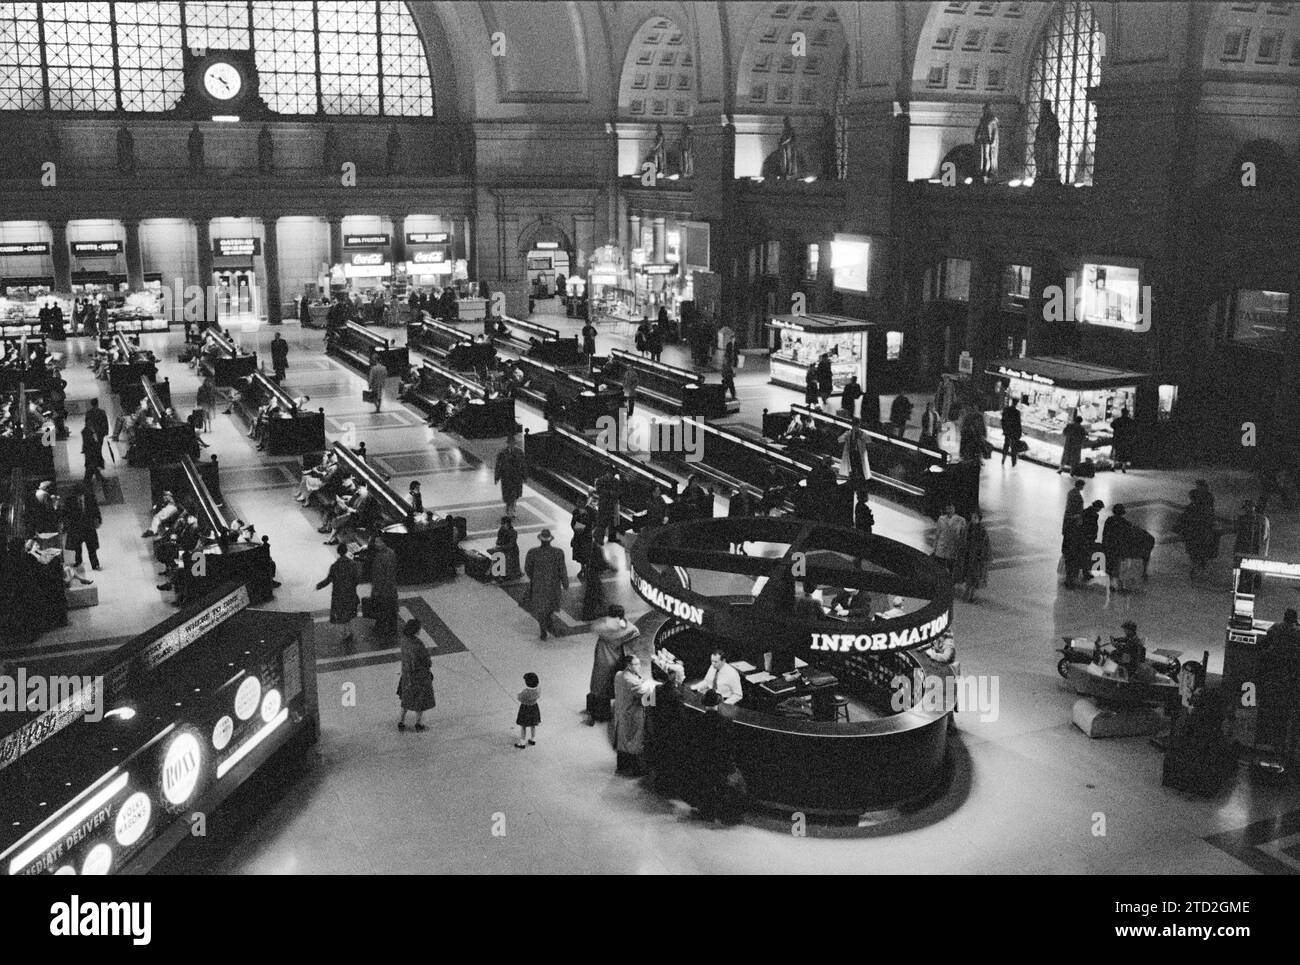 Interior view of Union Station showing waiting room, information booth and shops, Washington, D.C., USA, Marion S. Trikosko, U.S. News & World Report Magazine Photograph Collection, November 21, 1958 Stock Photo